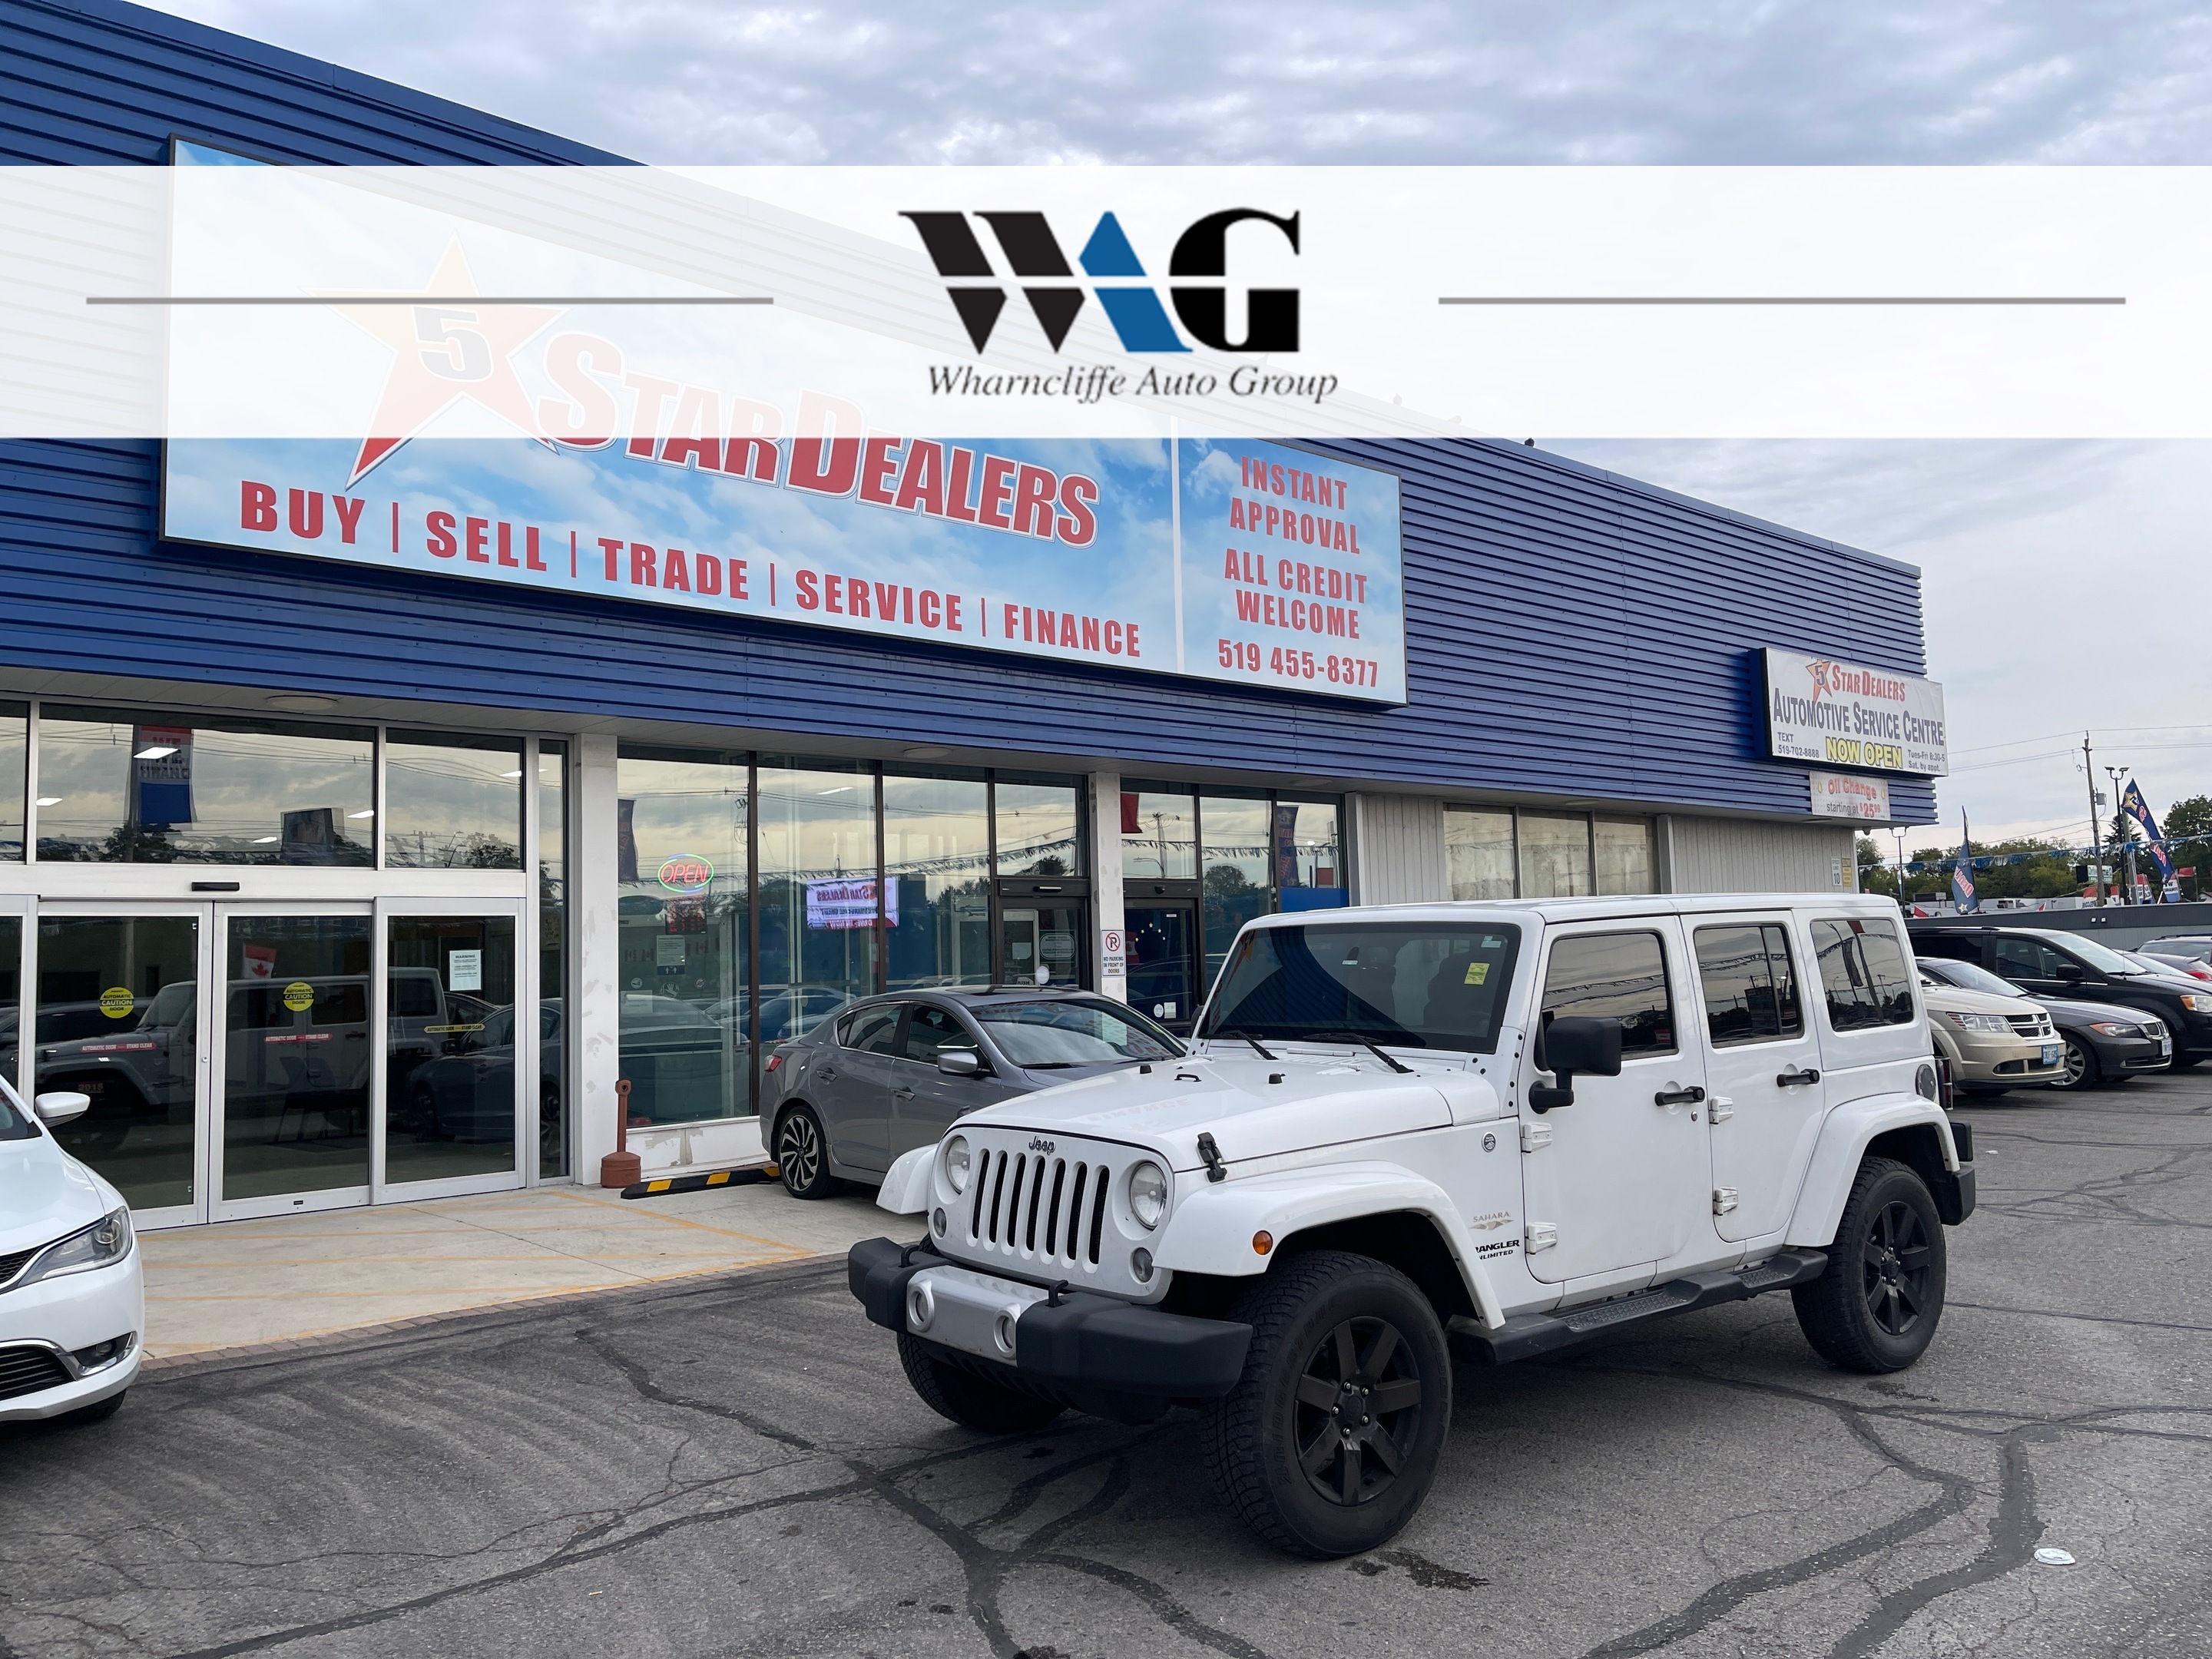 2014 Jeep WRANGLER UNLIMITED MINT CONDITION FULLY LOADED! WE FINANCE ALL CREDIT